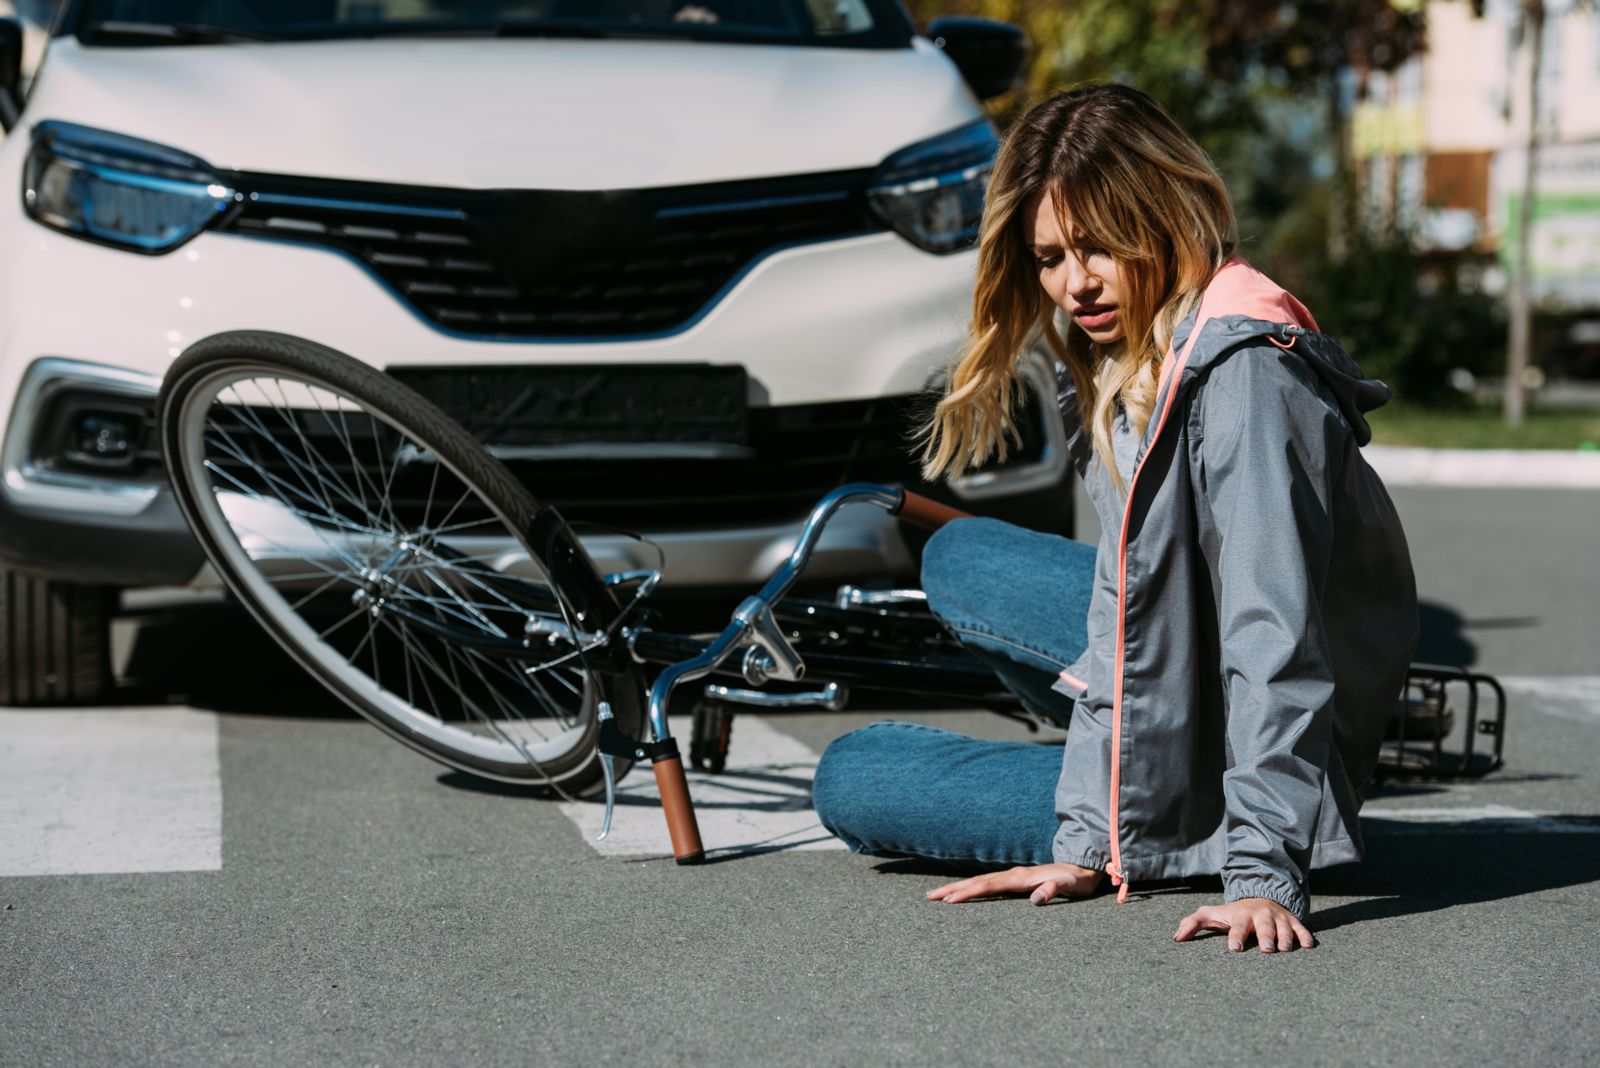 What to Expect from a Bicycle Accident Attorney